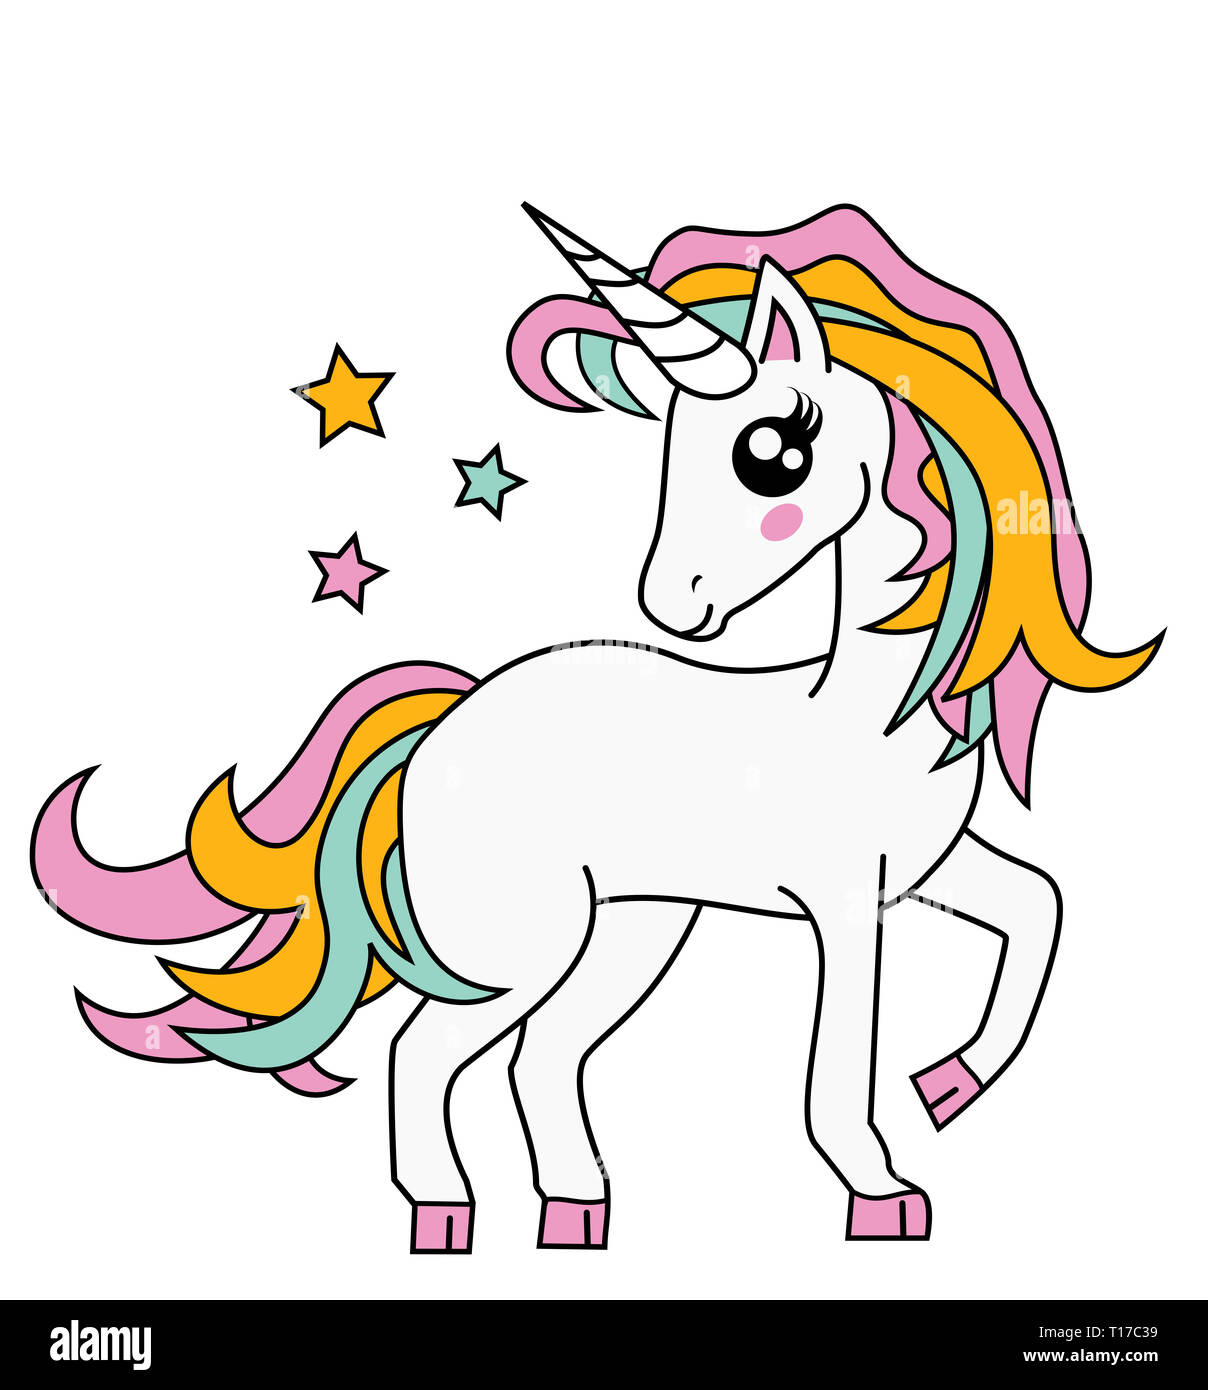 Cute Little Magic Unicorn isolated on white, Vector Illustration. Fairy Tale Character. Fantasy Cartoon Character. Animals And Mythical Creatures. Stock Photo